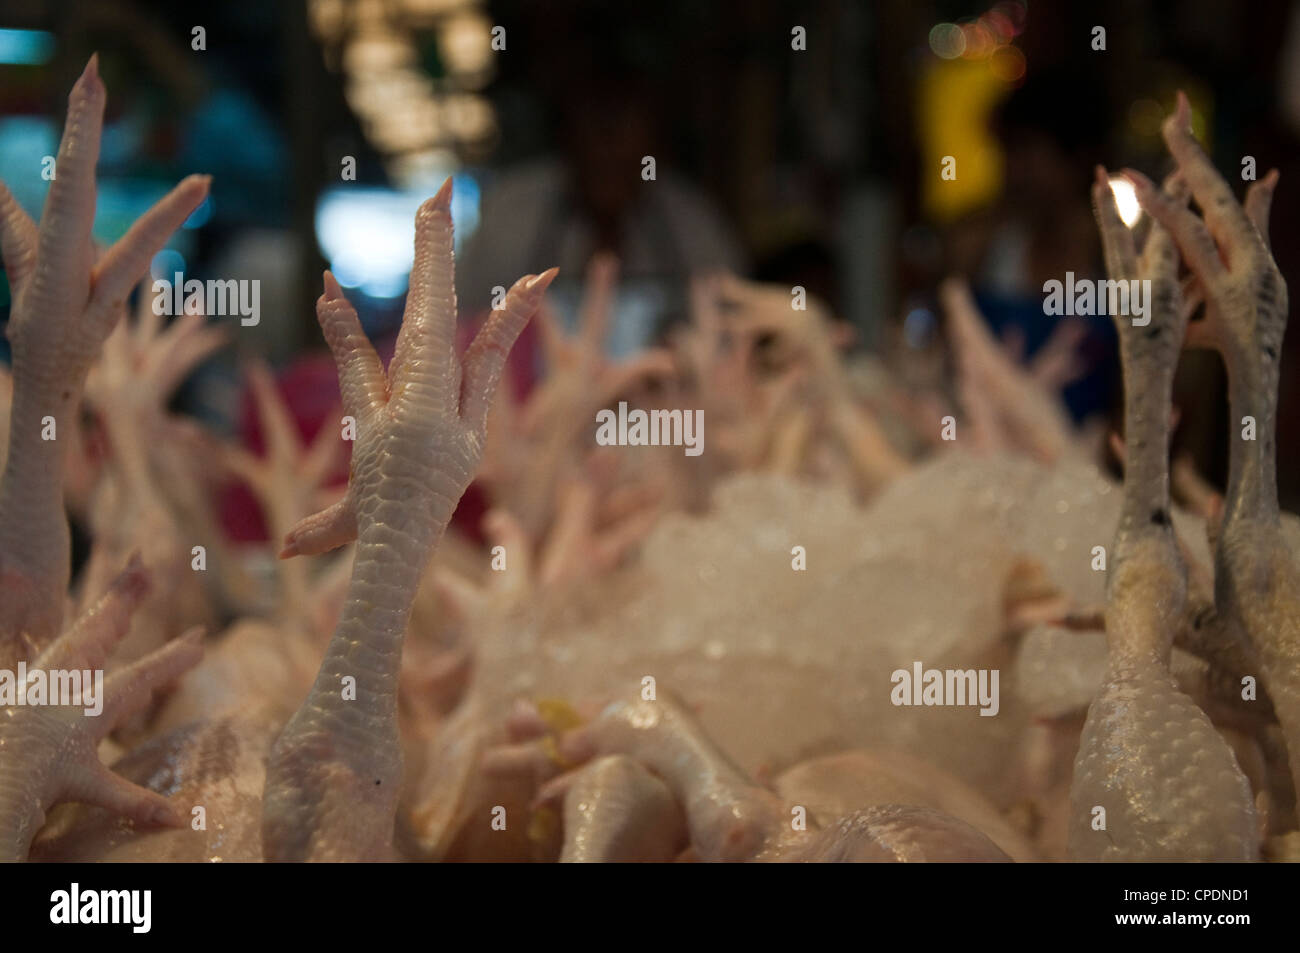 Chicken feet from dead chickens in a Thailand market Stock Photo